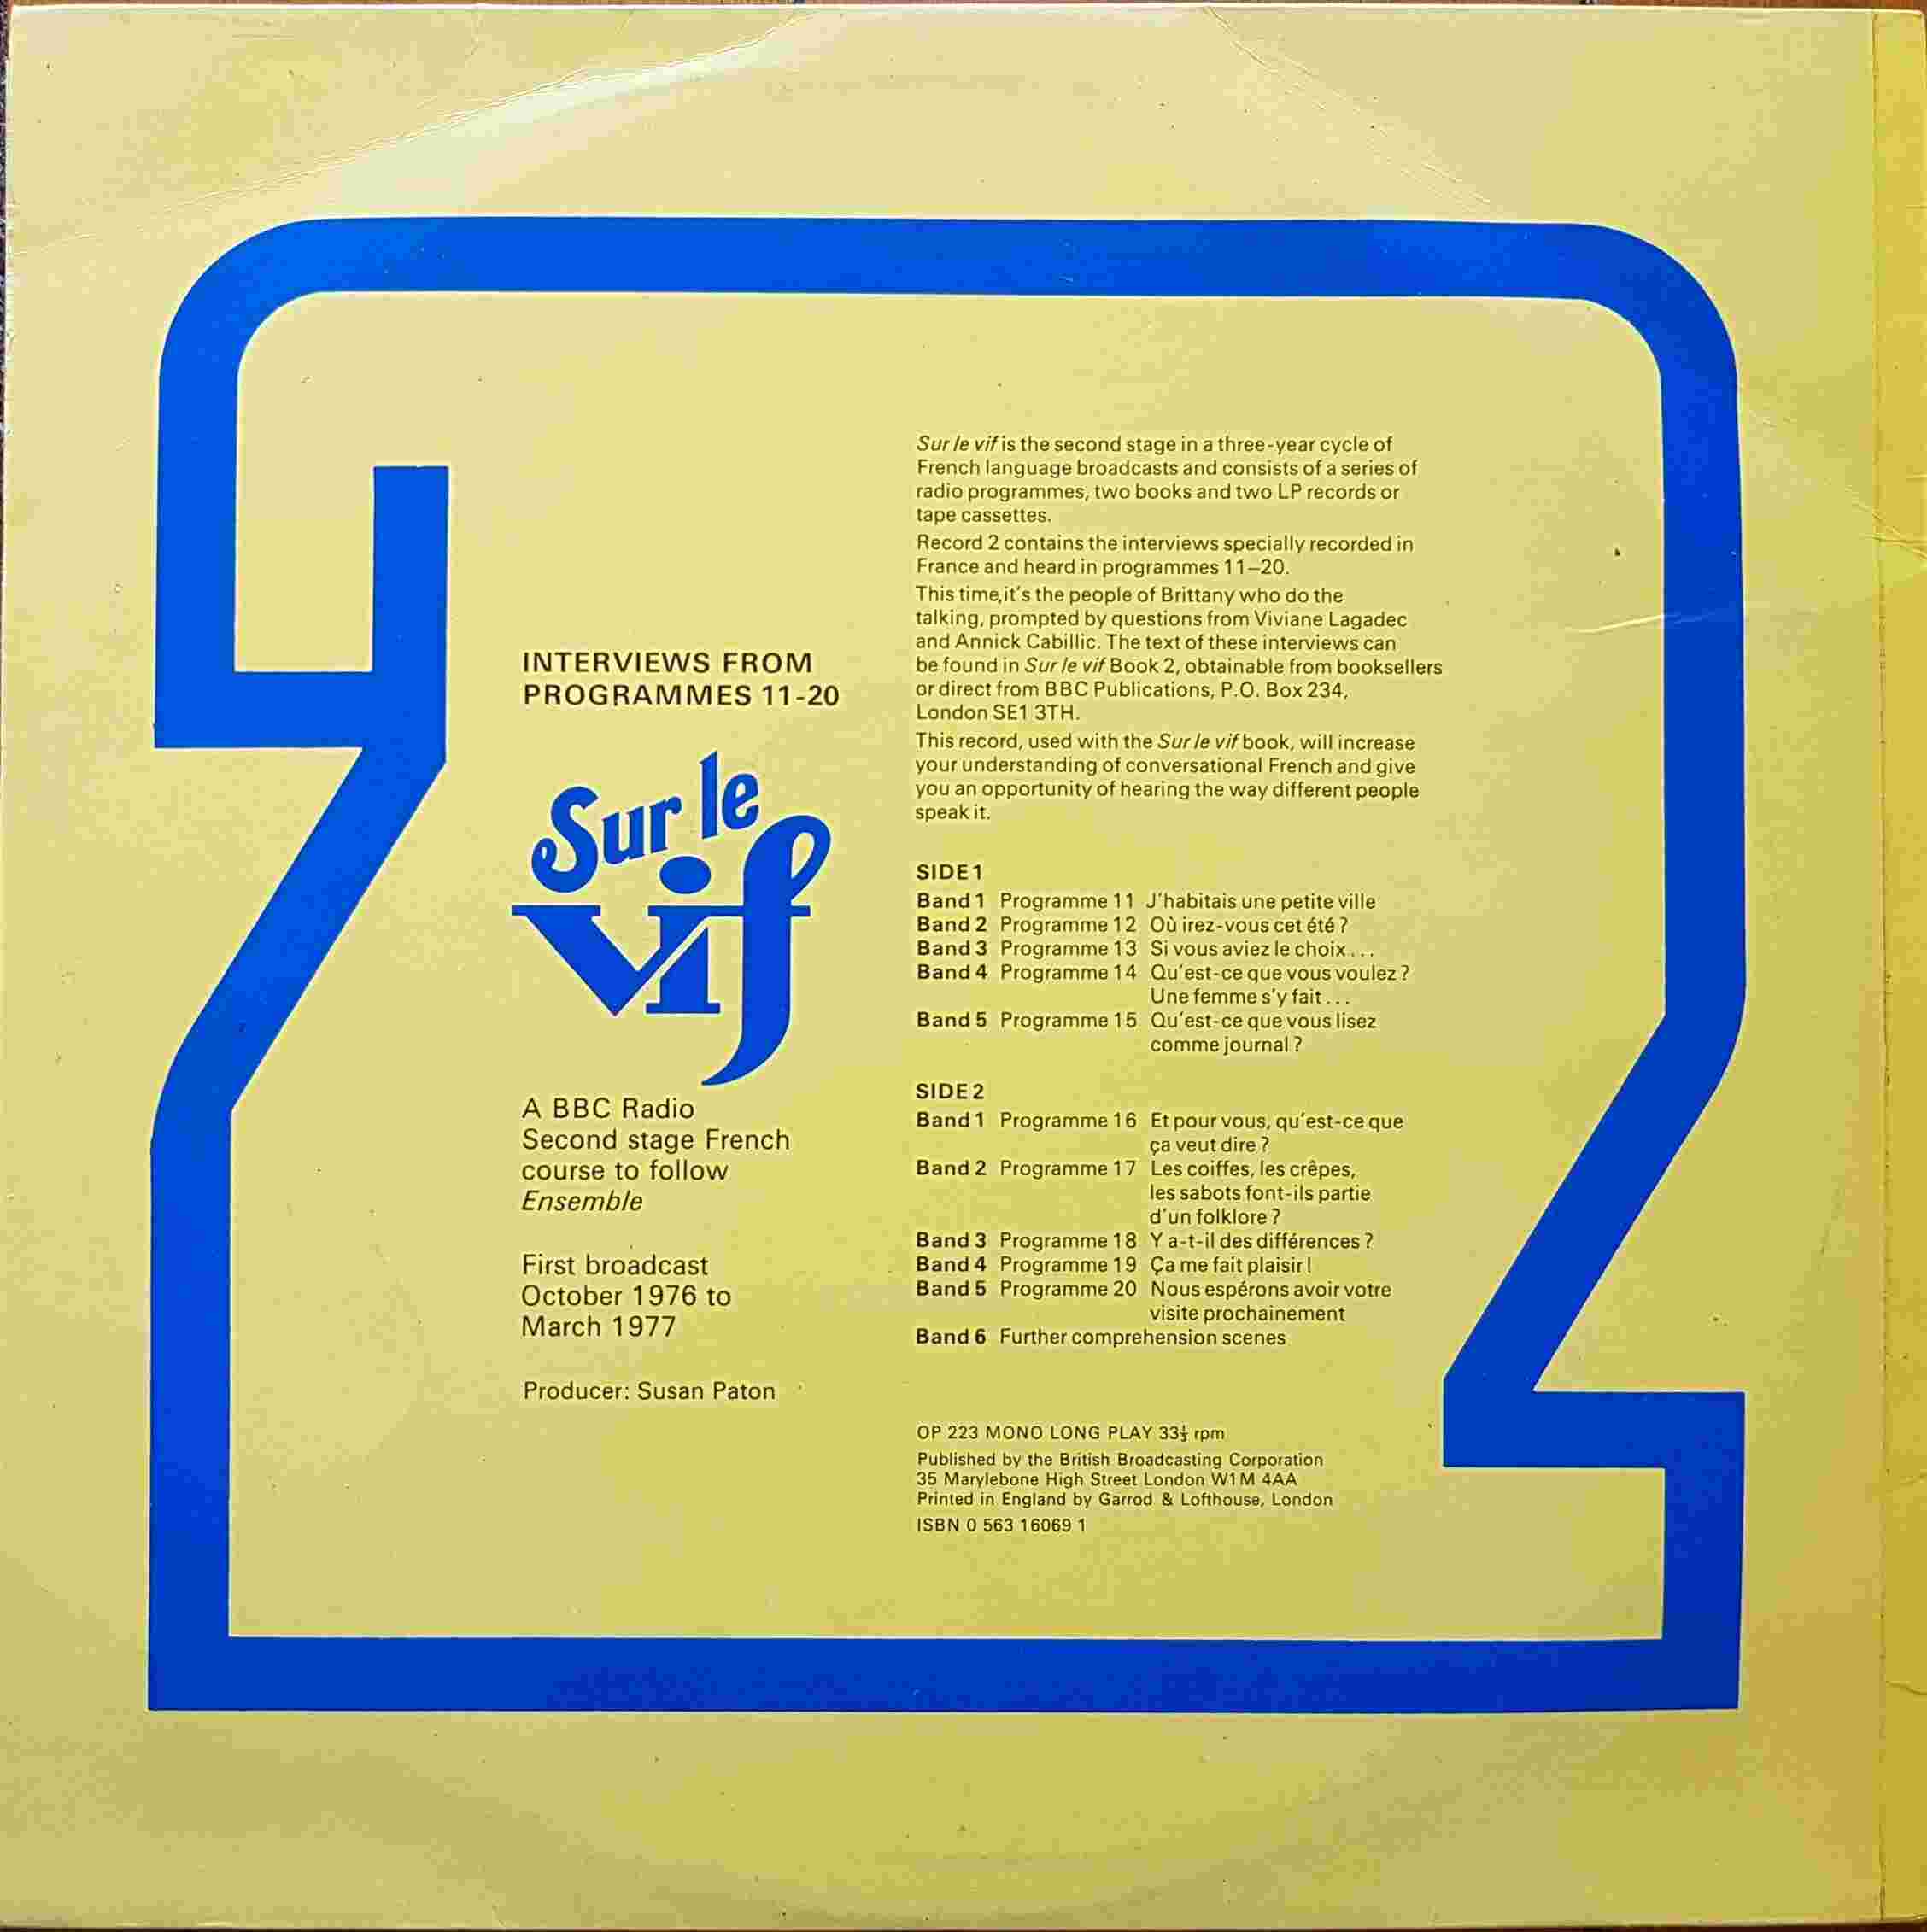 Picture of OP 223 Sur le vif 2 - Second stage French course - Programmes 11 - 20 by artist Various from the BBC records and Tapes library